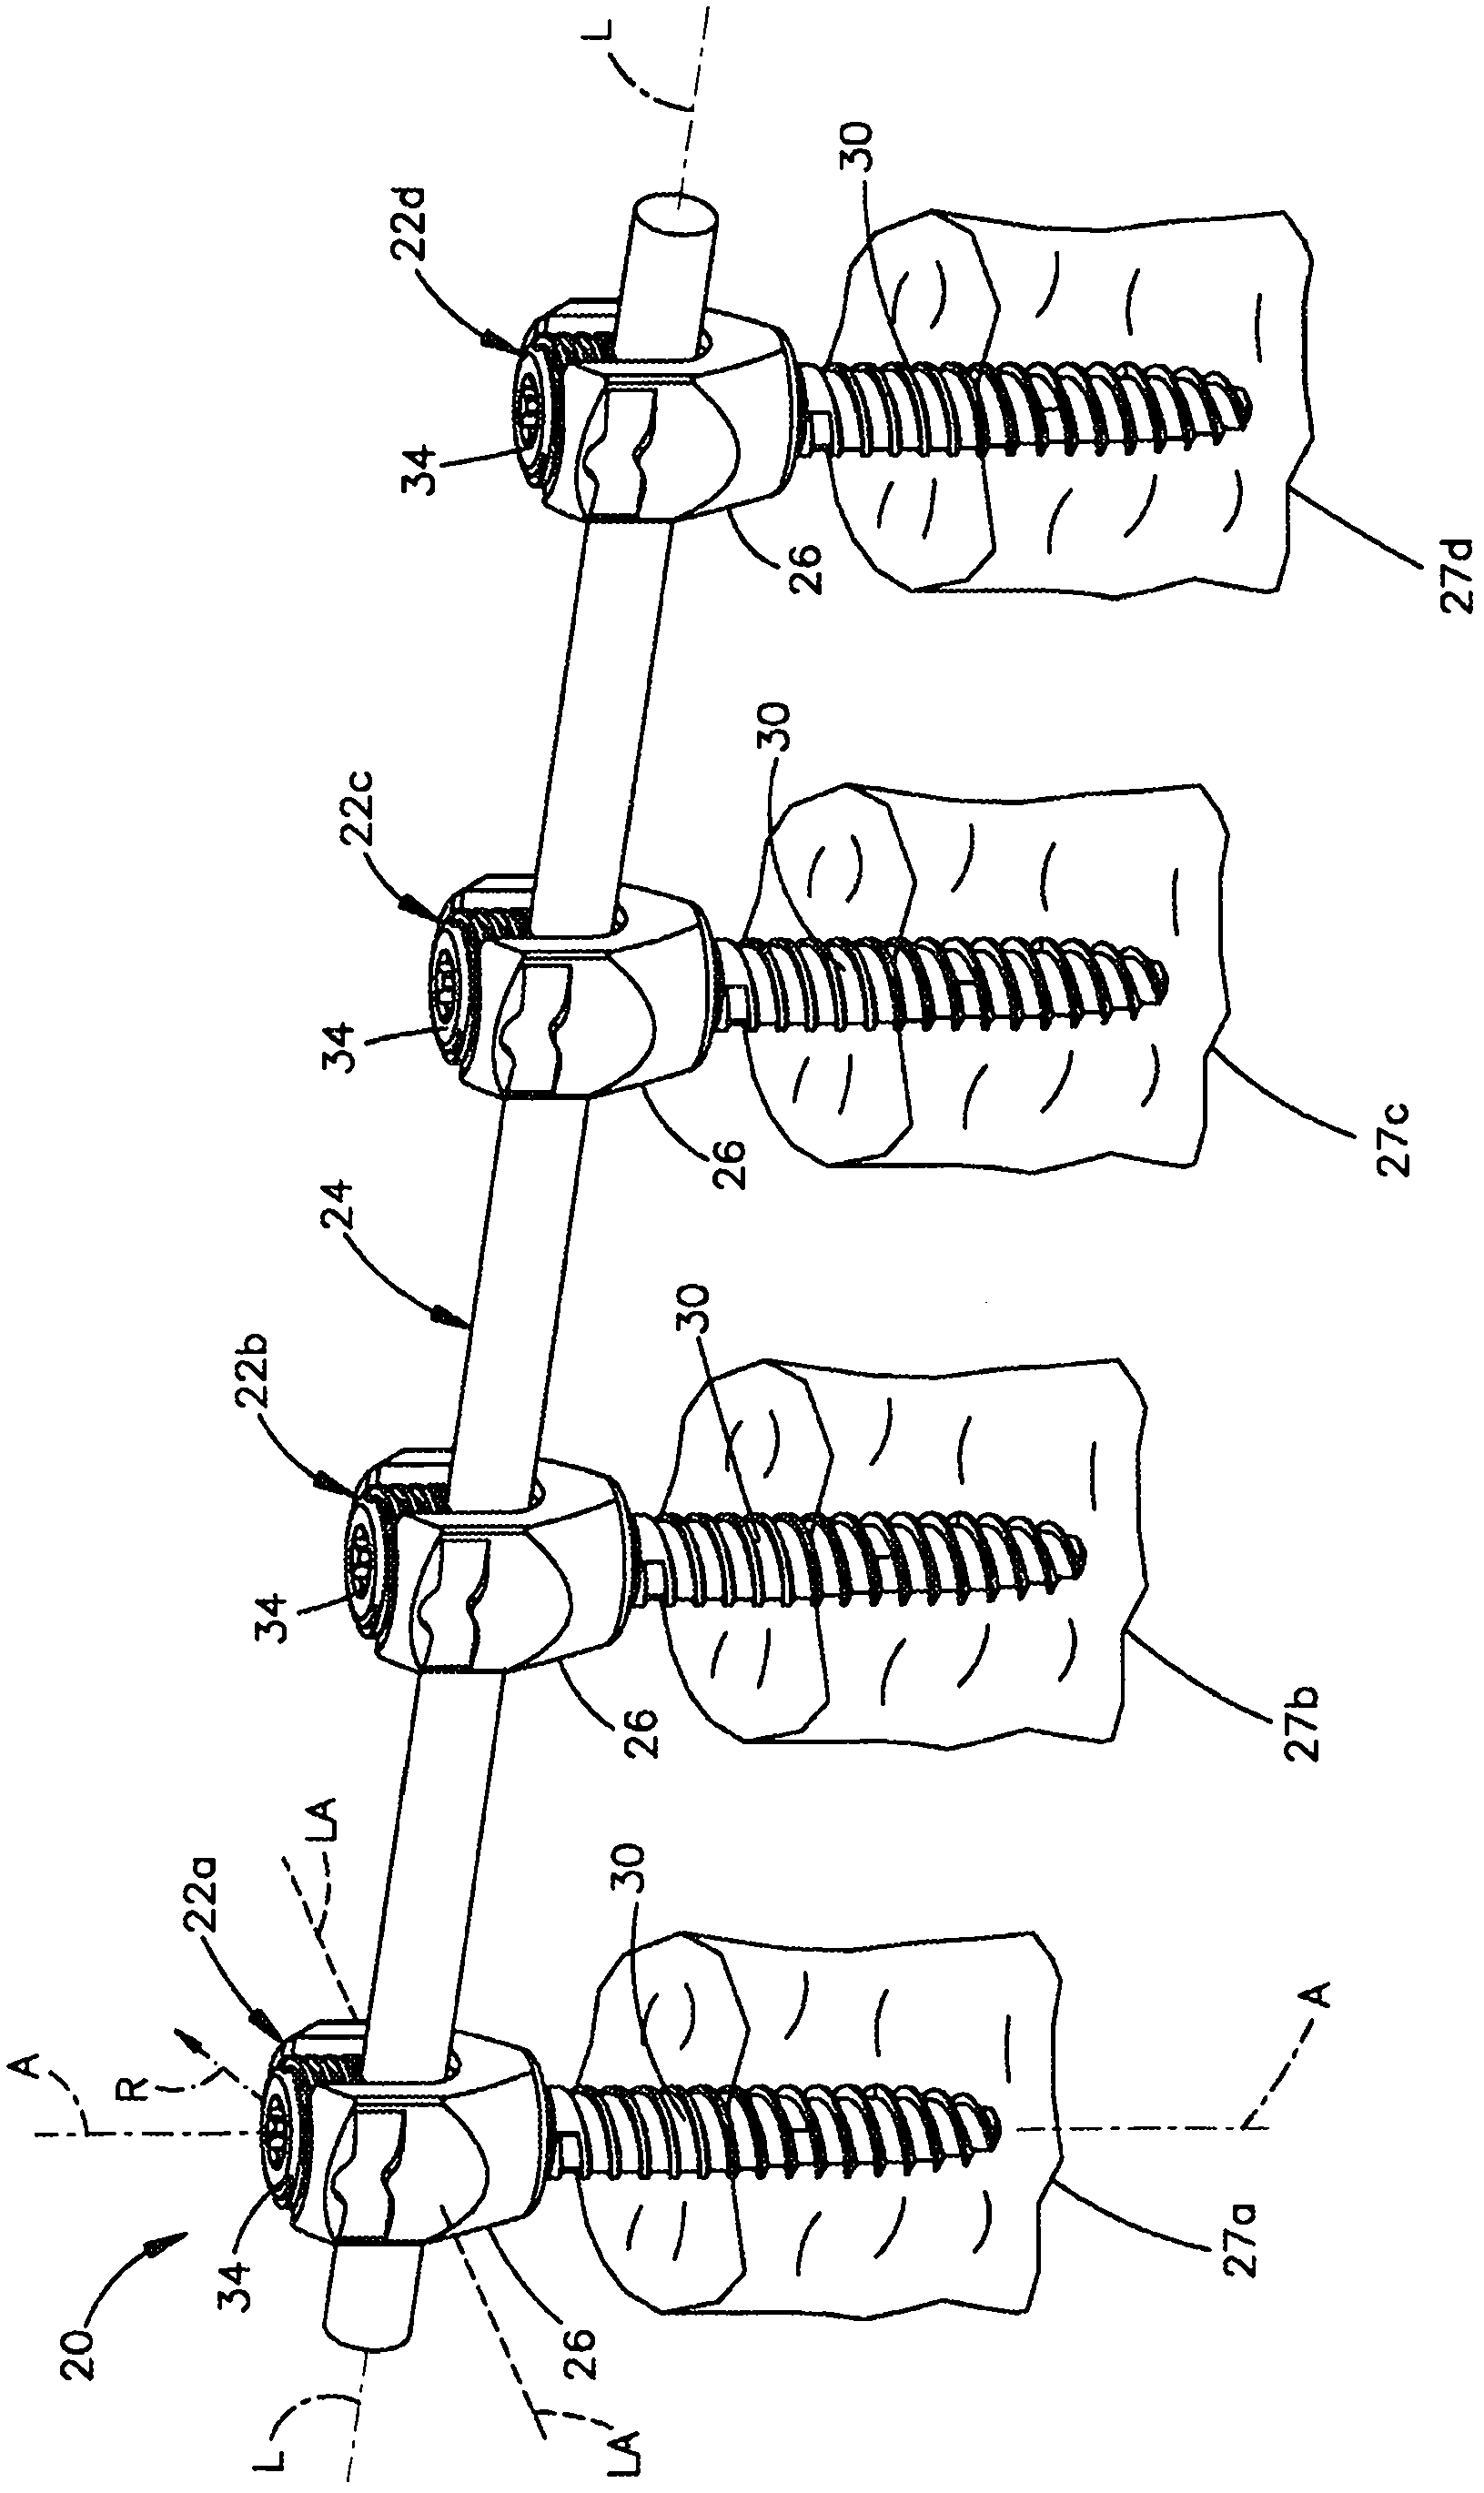 Revision connector for spinal constructs